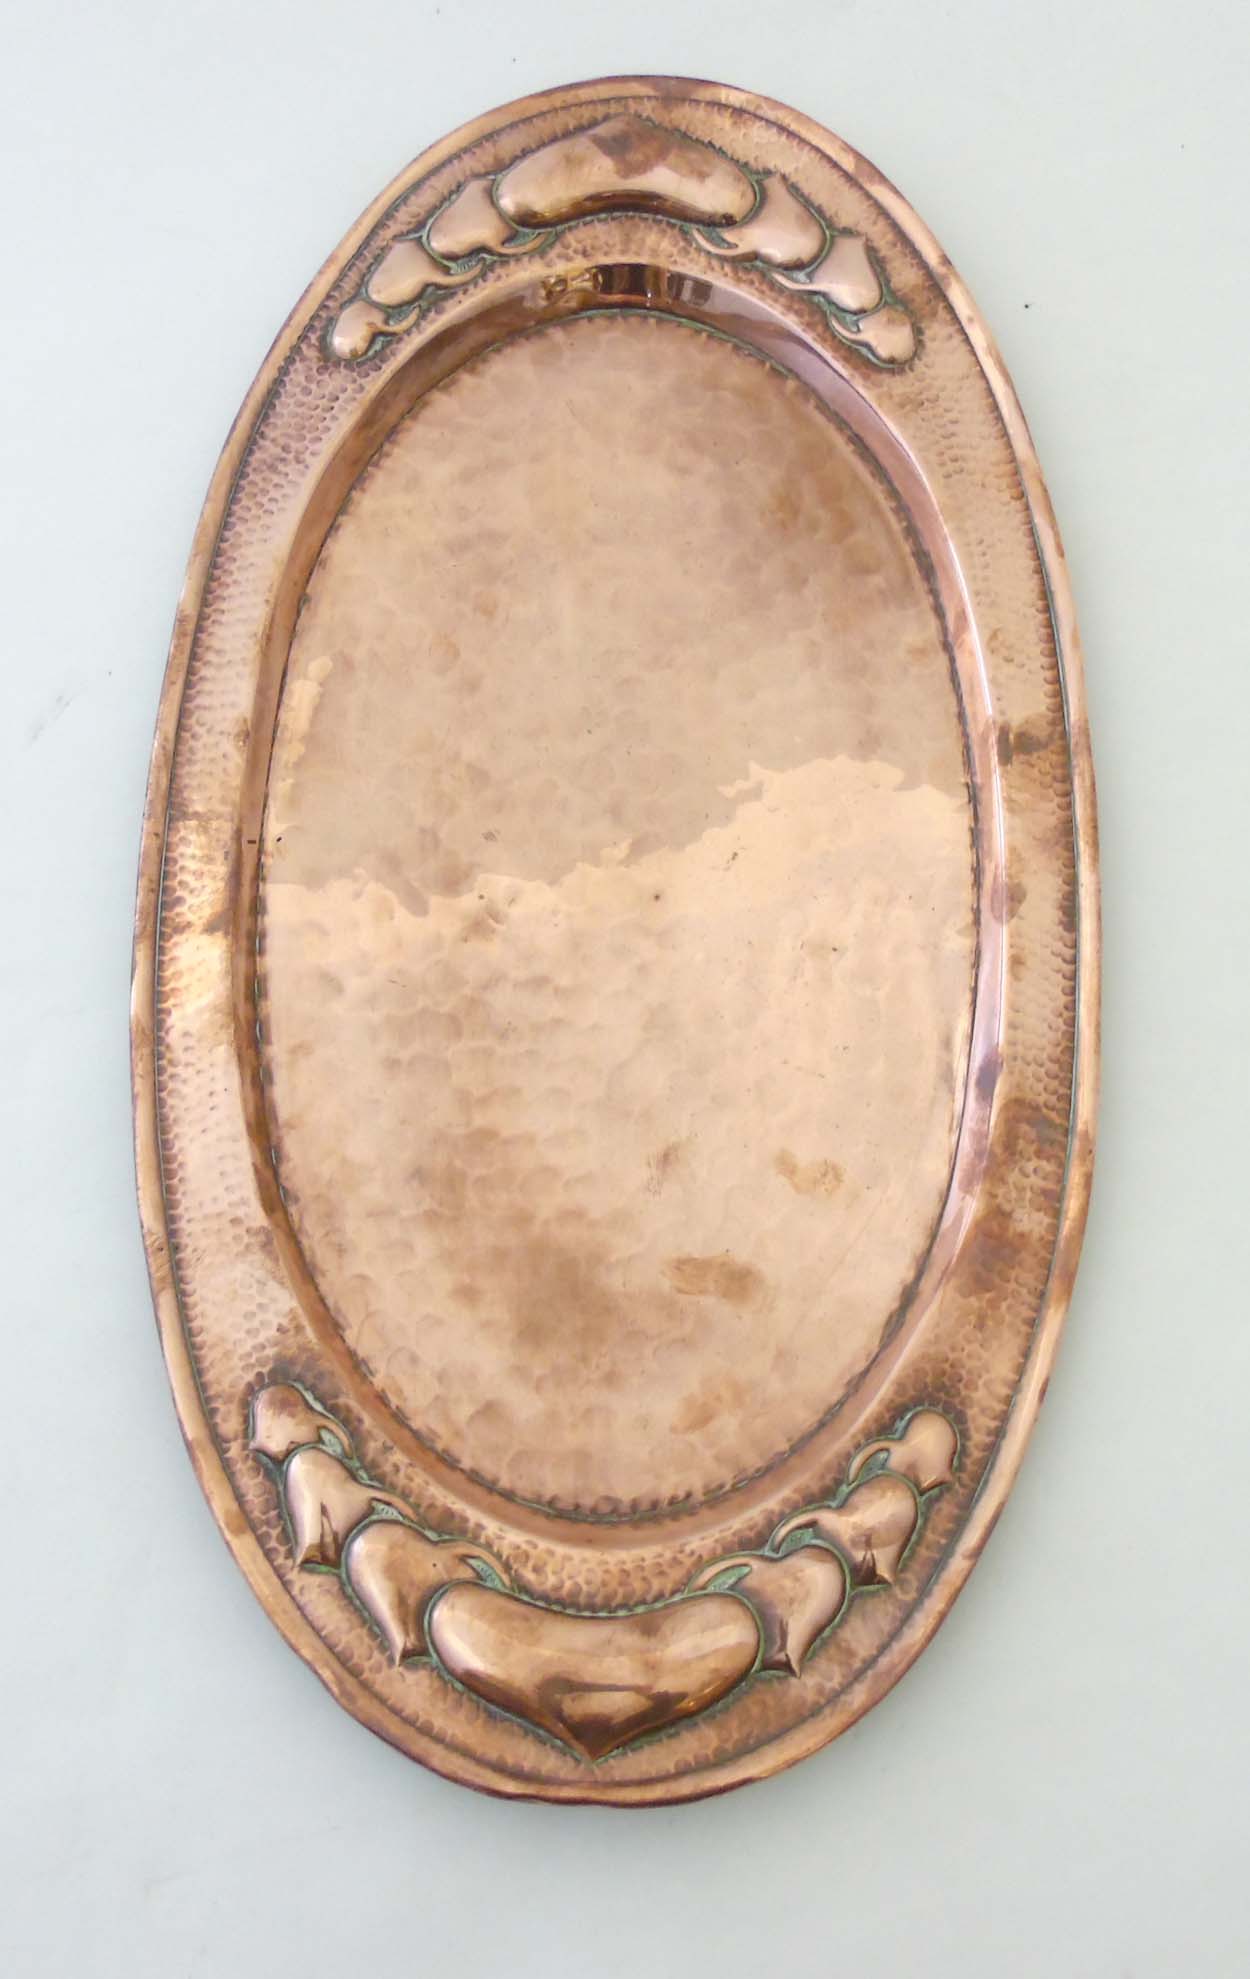 Art and Crafts Decorative metalware : An embossed and plannished large oval butlers tray with heart - Image 5 of 7